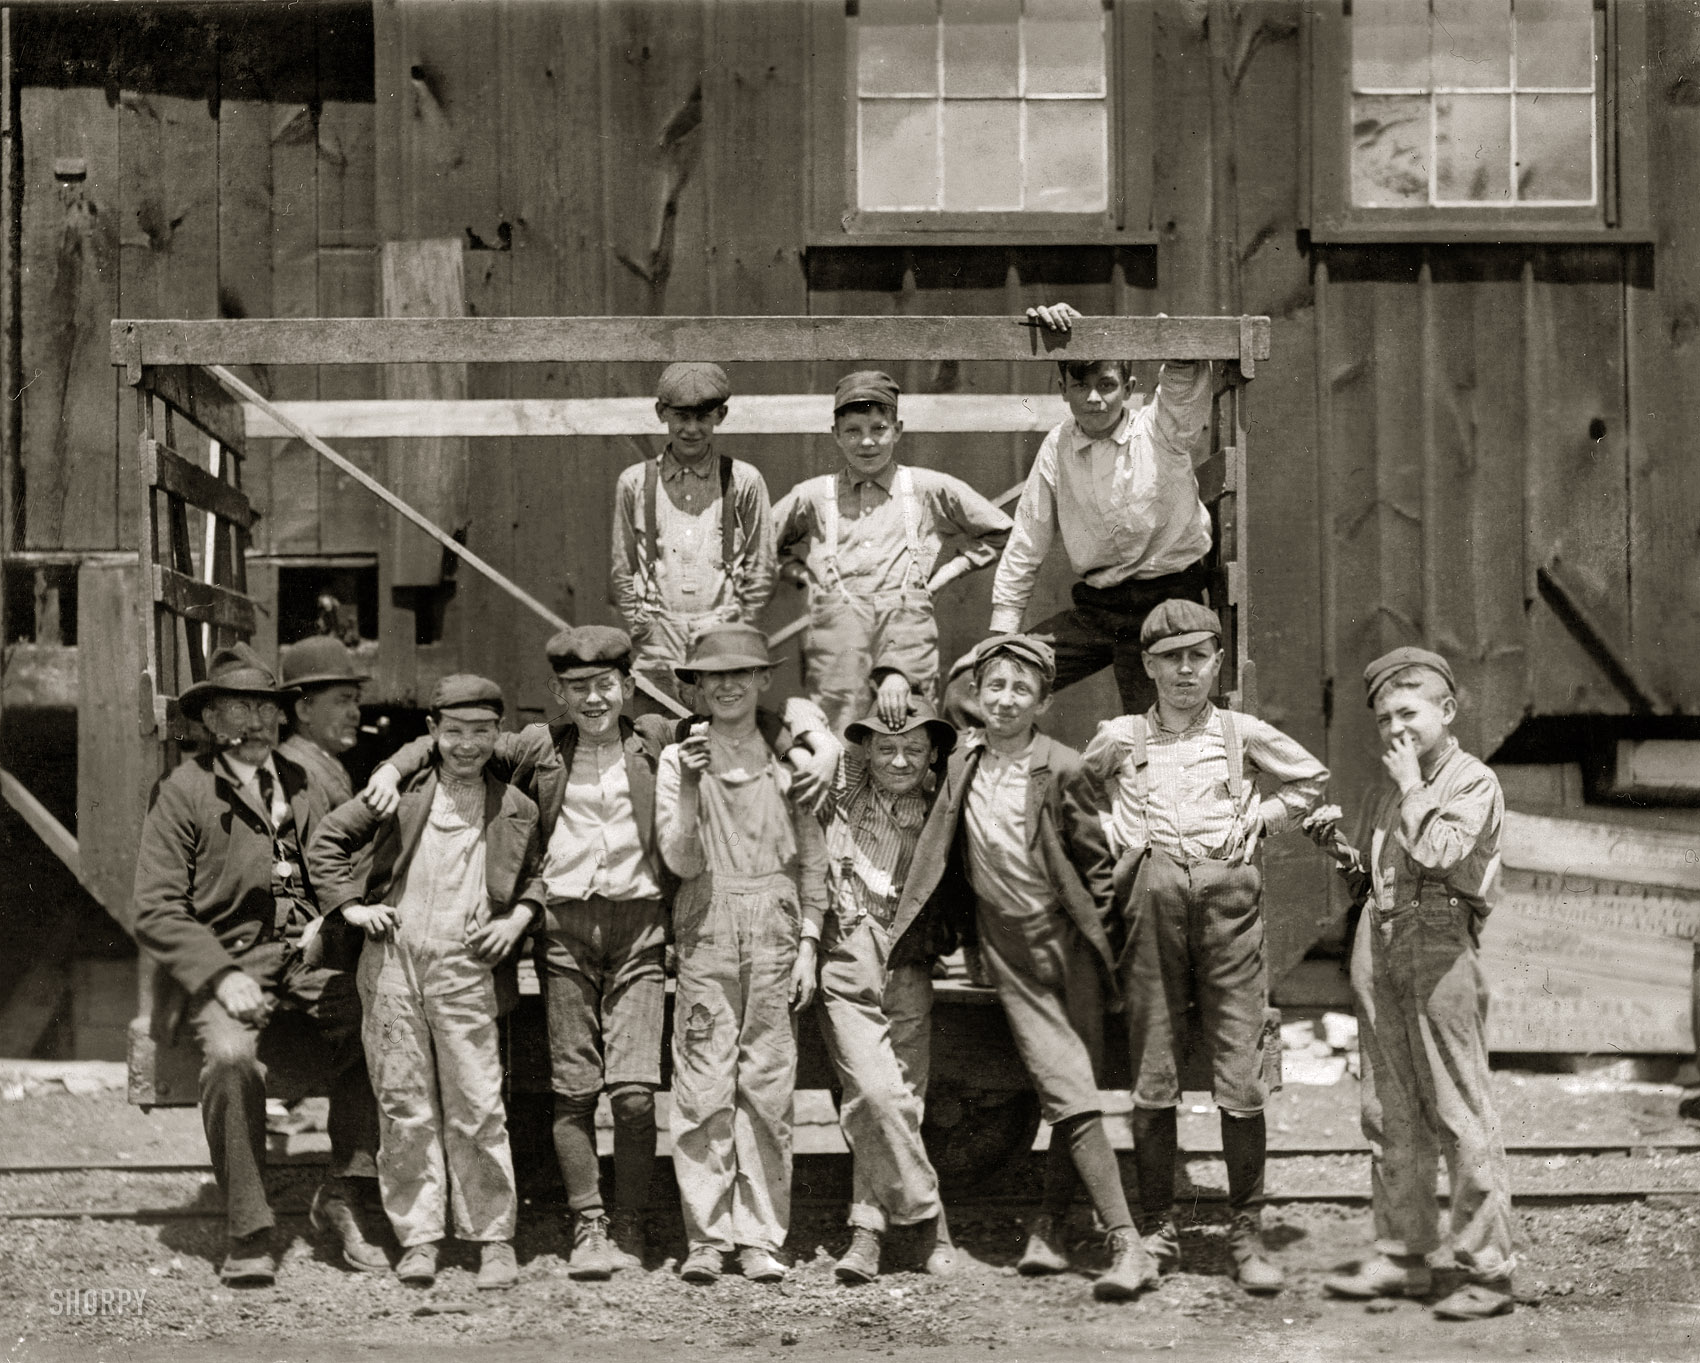 May 17, 1910. Alton, Illinois, "Noon hour. These boys are all working in the Illinois Glass Company. Smallest boy, Frank Dwyer, 1009½ E. Sixth Street, says he has been working here three months. Joe Dwyer (brother) has been working here over two years. Henry Maul, 513 Central Avenue. Frank Schenk, lives with uncle, 611 Central Avenue. Emil Ohley, 1012 E. Sixth Street. William Jarett, 825 E. Fifth Street. Fred Metz, 707 Bloomfield Street. In addition to their telling me they worked, I saw them beginning work just before 1 p.m. Photo at 12:30." Photograph and caption by Lewis Wickes Hine. View full size.